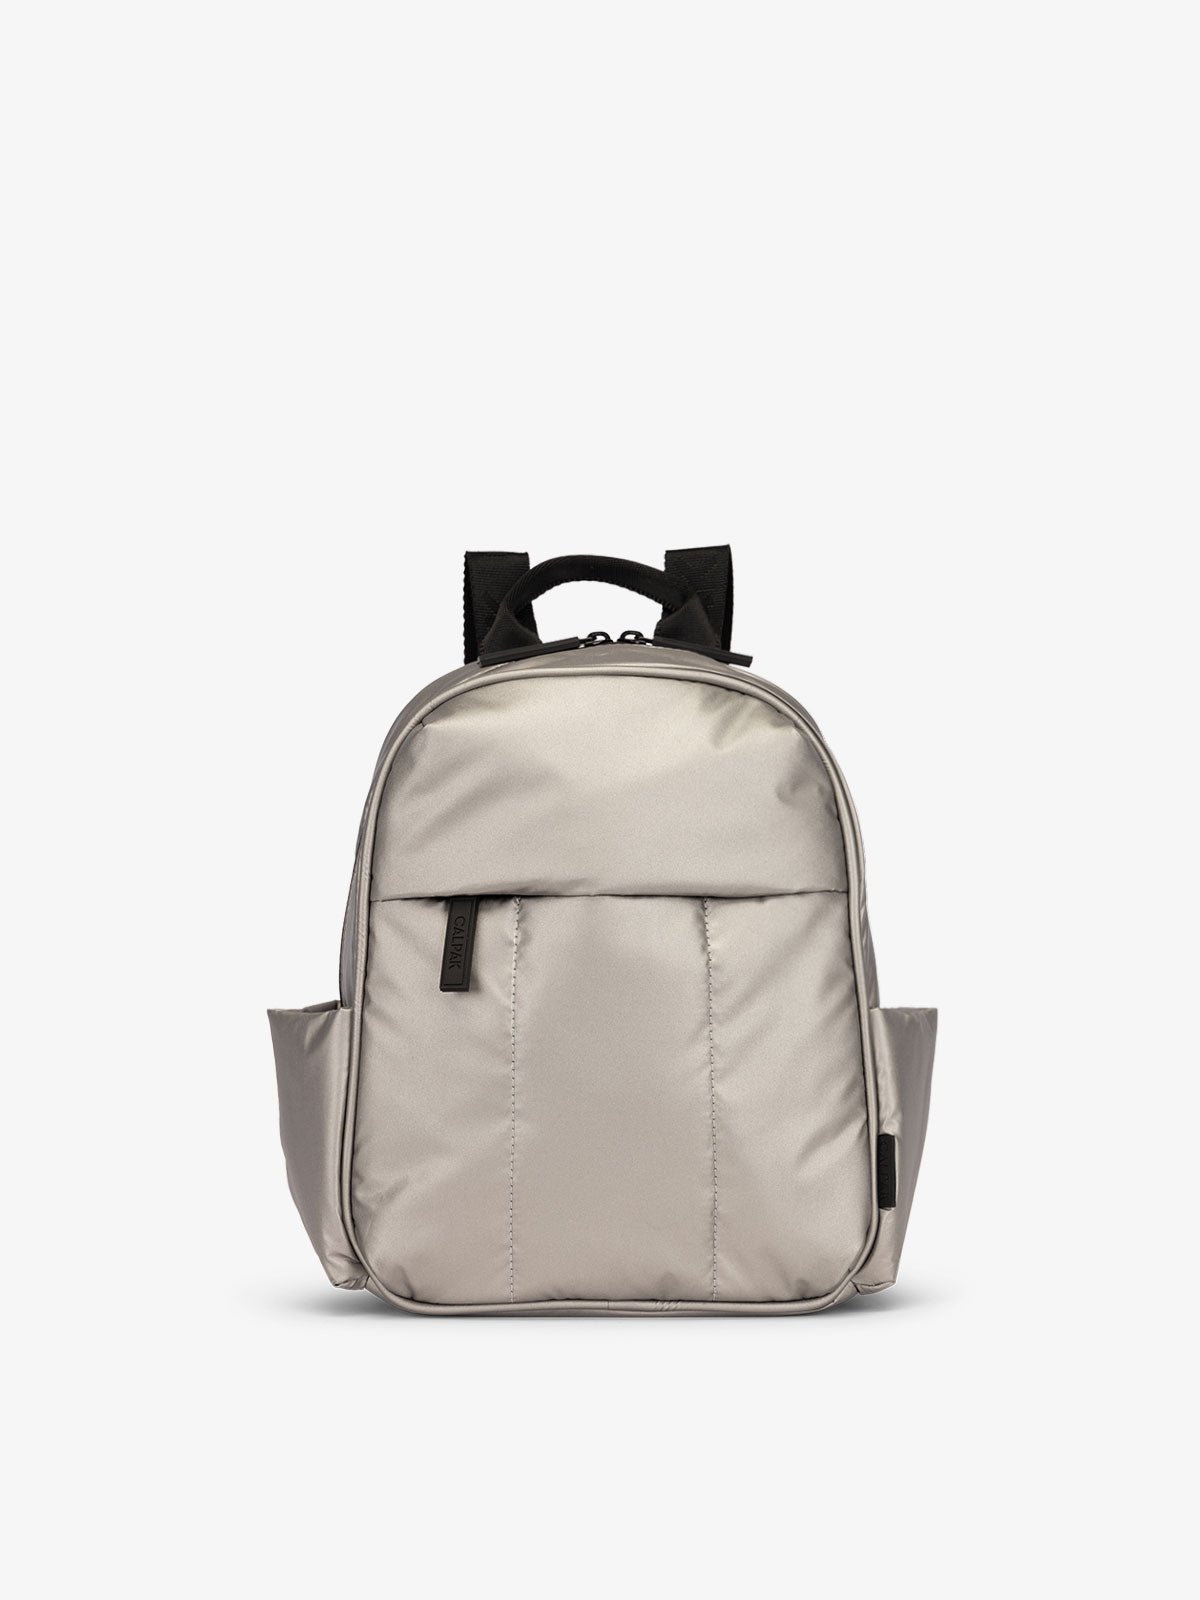 CALPAK Luka Mini Backpack with soft puffy exterior and front zippered pocket in metallic silver